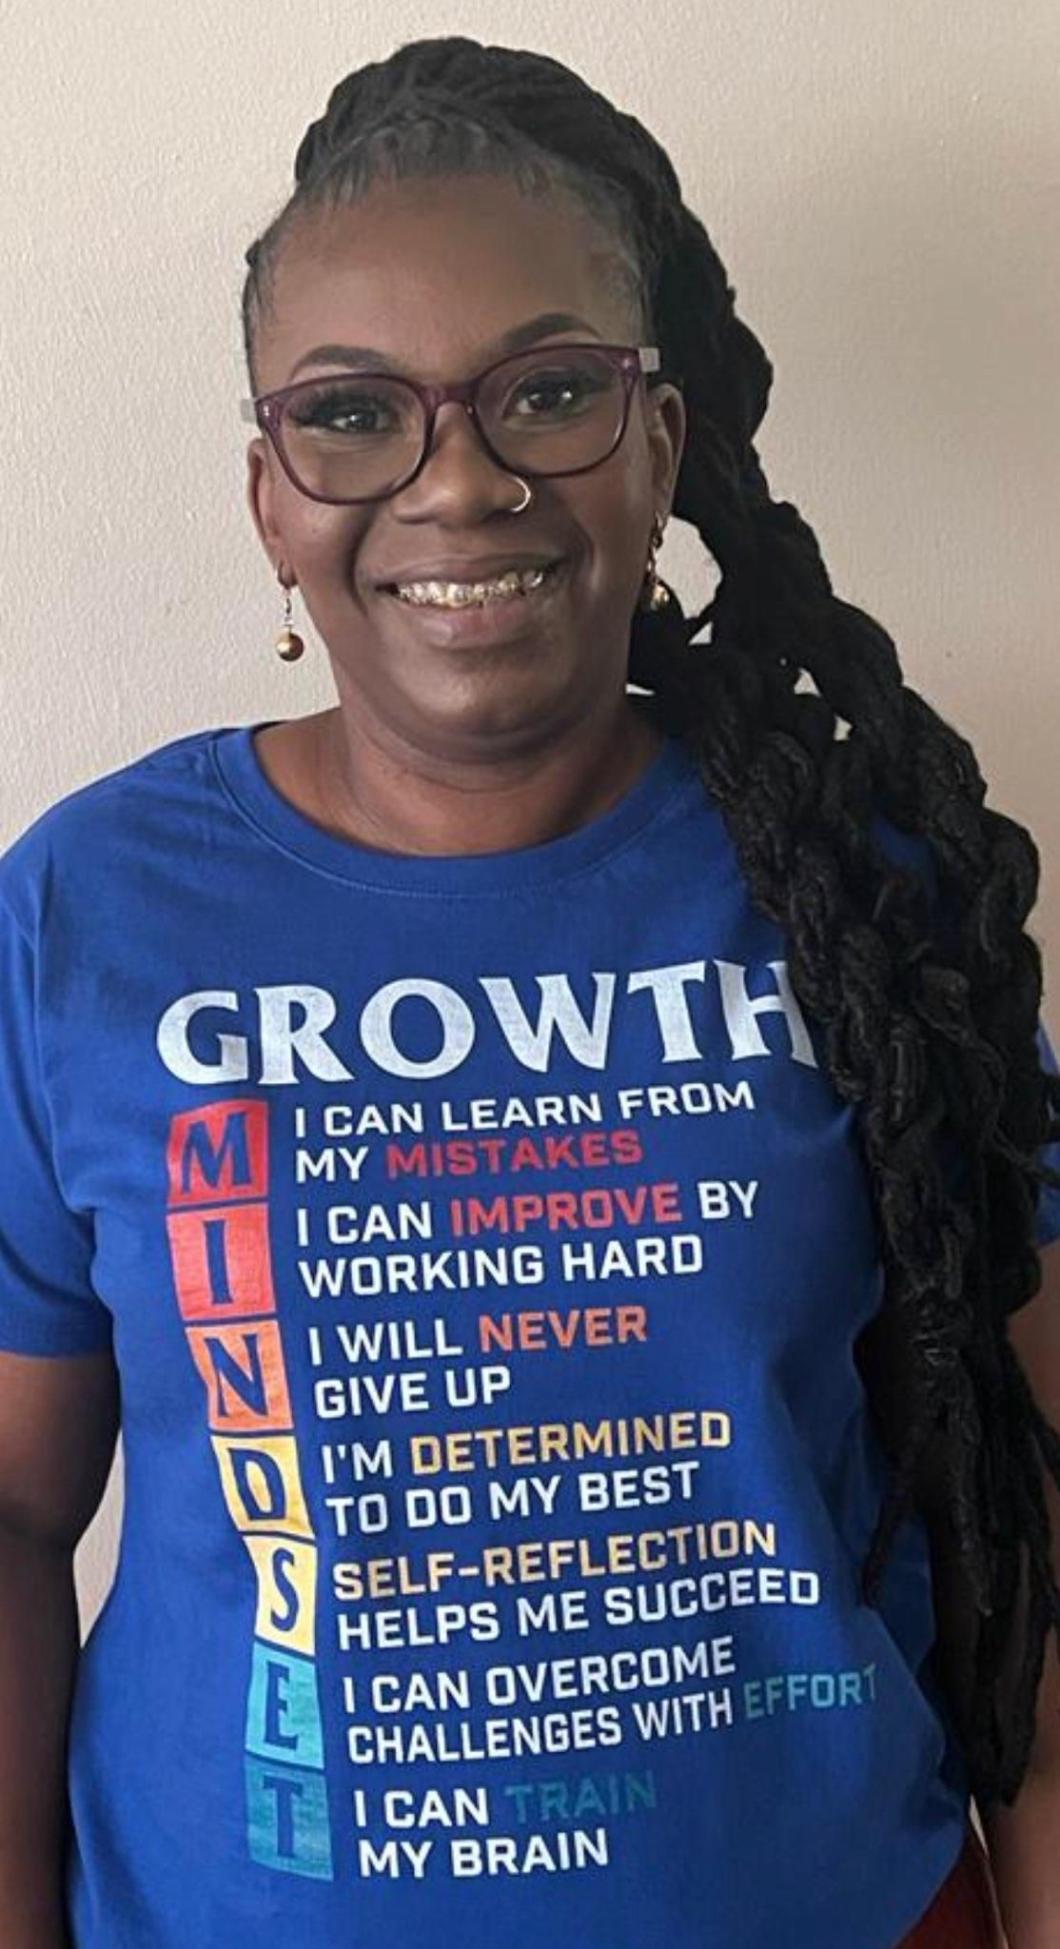 Person with a long hair braided to one side wears glasses and a blue shirt that says "Growth" and then sentences about Mindset